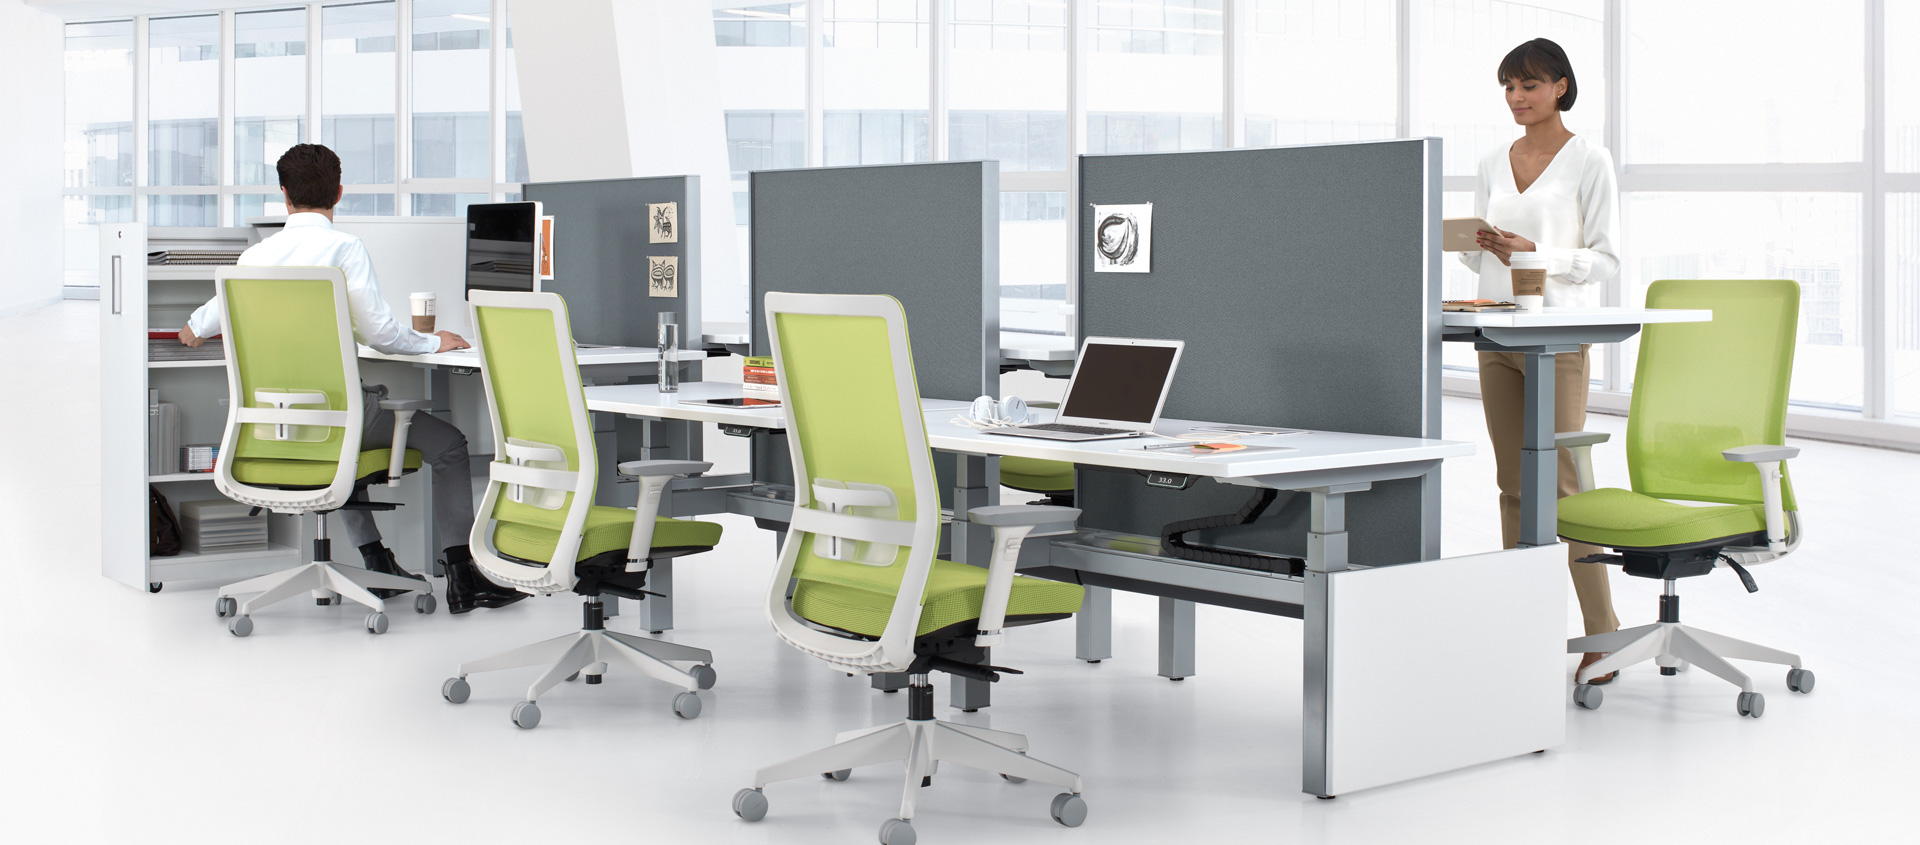 Work Stations, Open Benching Systems, and Cubicles: The Options and Products at Ace Office Furniture Houston